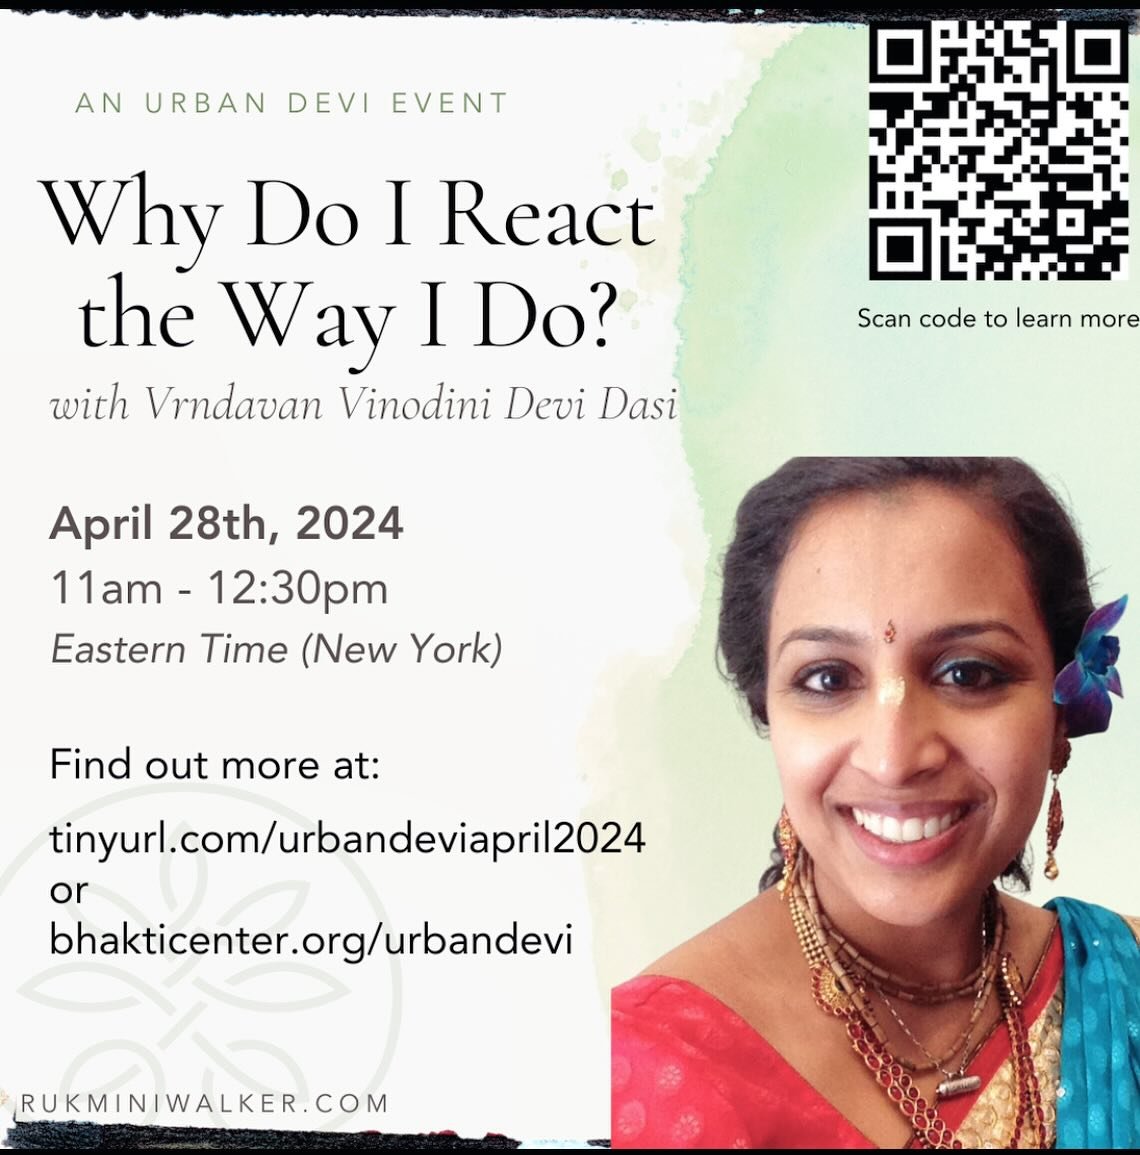 We invite all urban devi out there to our monthly Sanga next Sunday&hellip;
Topic: Often, our reactive patterns (ie. snapping at others, shutting down, getting impatient, feeling overwhelmed, pushing ourselves to do more, etc..) gets the better of us